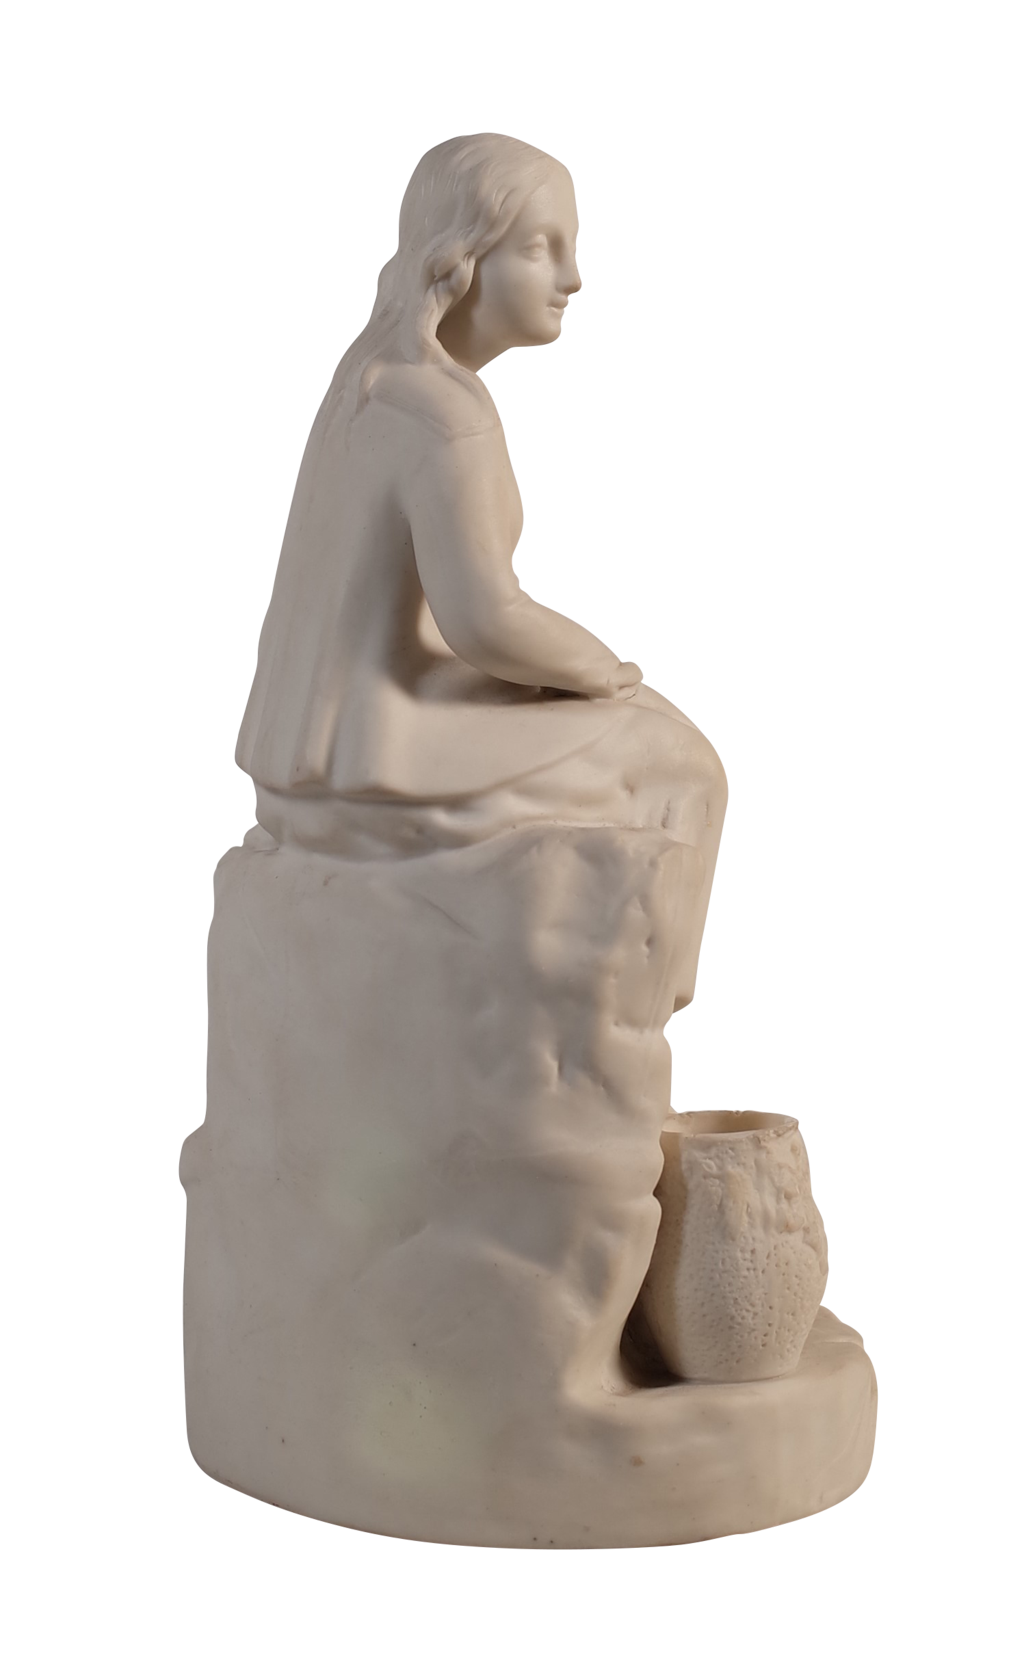 Parian Ware Figure of a Cottage Girl Seated on a Rocky Mound by a Well